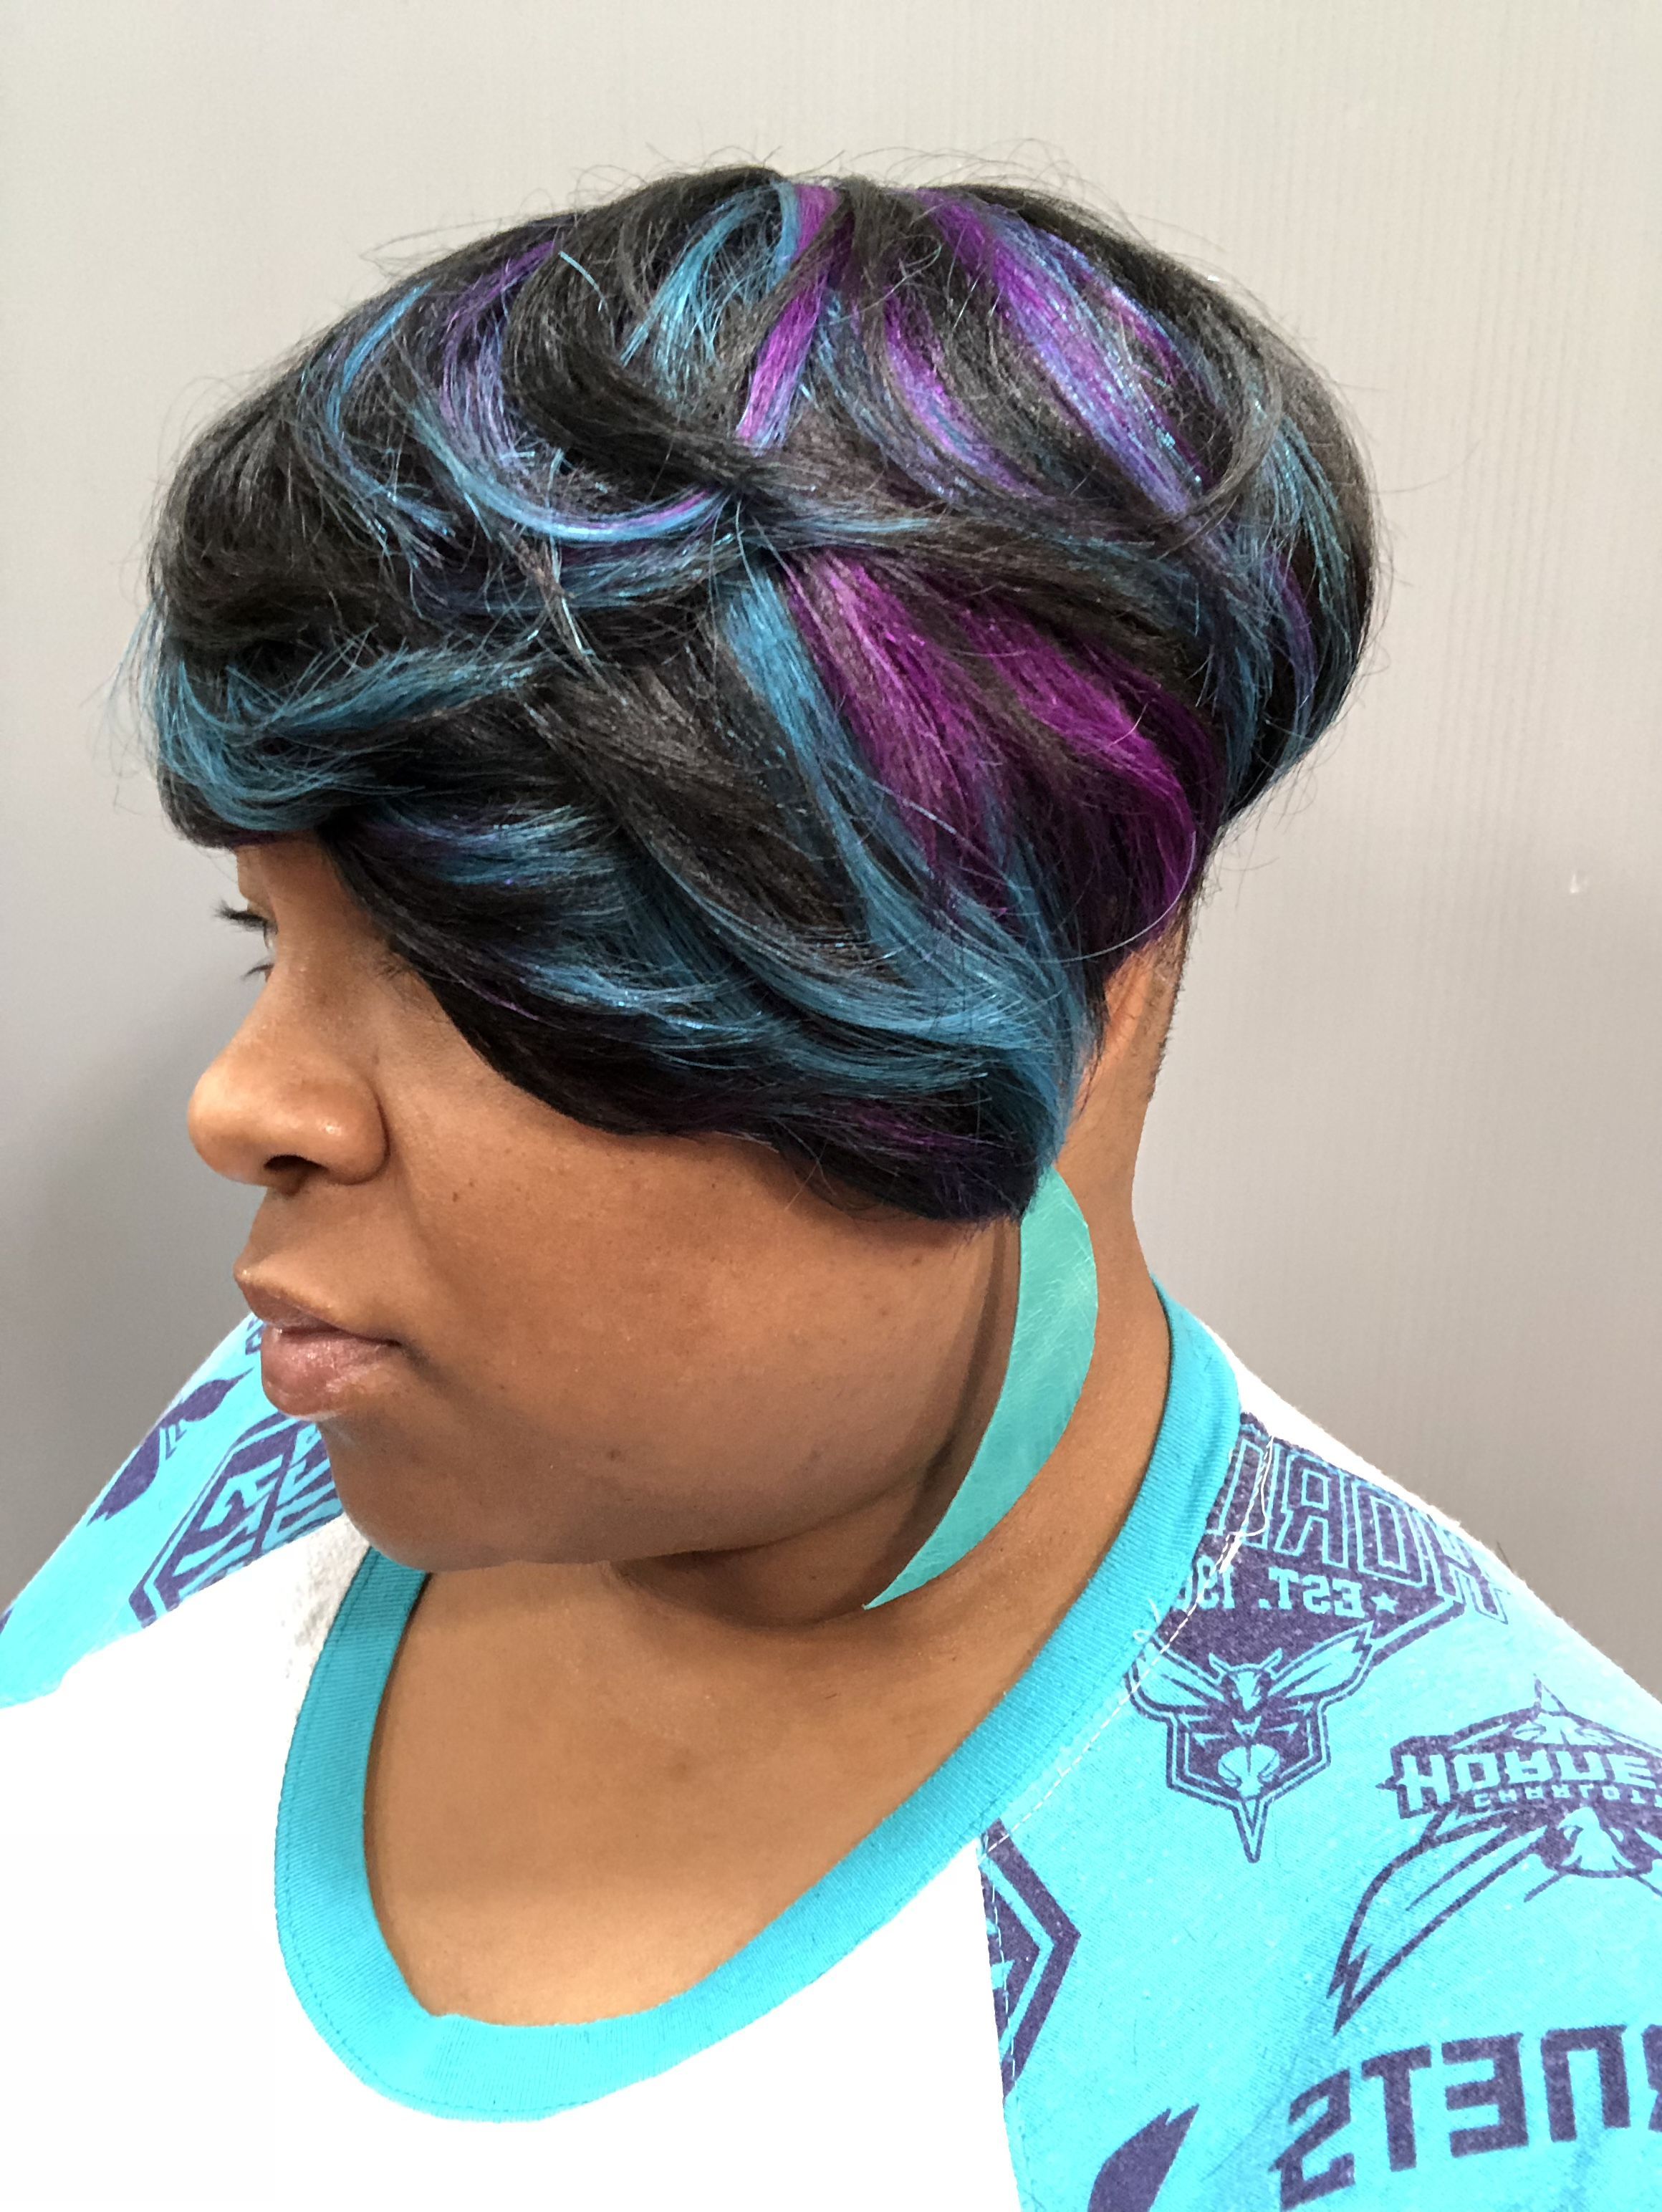 Short Hair Style With Shaved Sides, Purple And Turquoise Highlights Within Purple And Black Short Hairstyles (View 4 of 25)